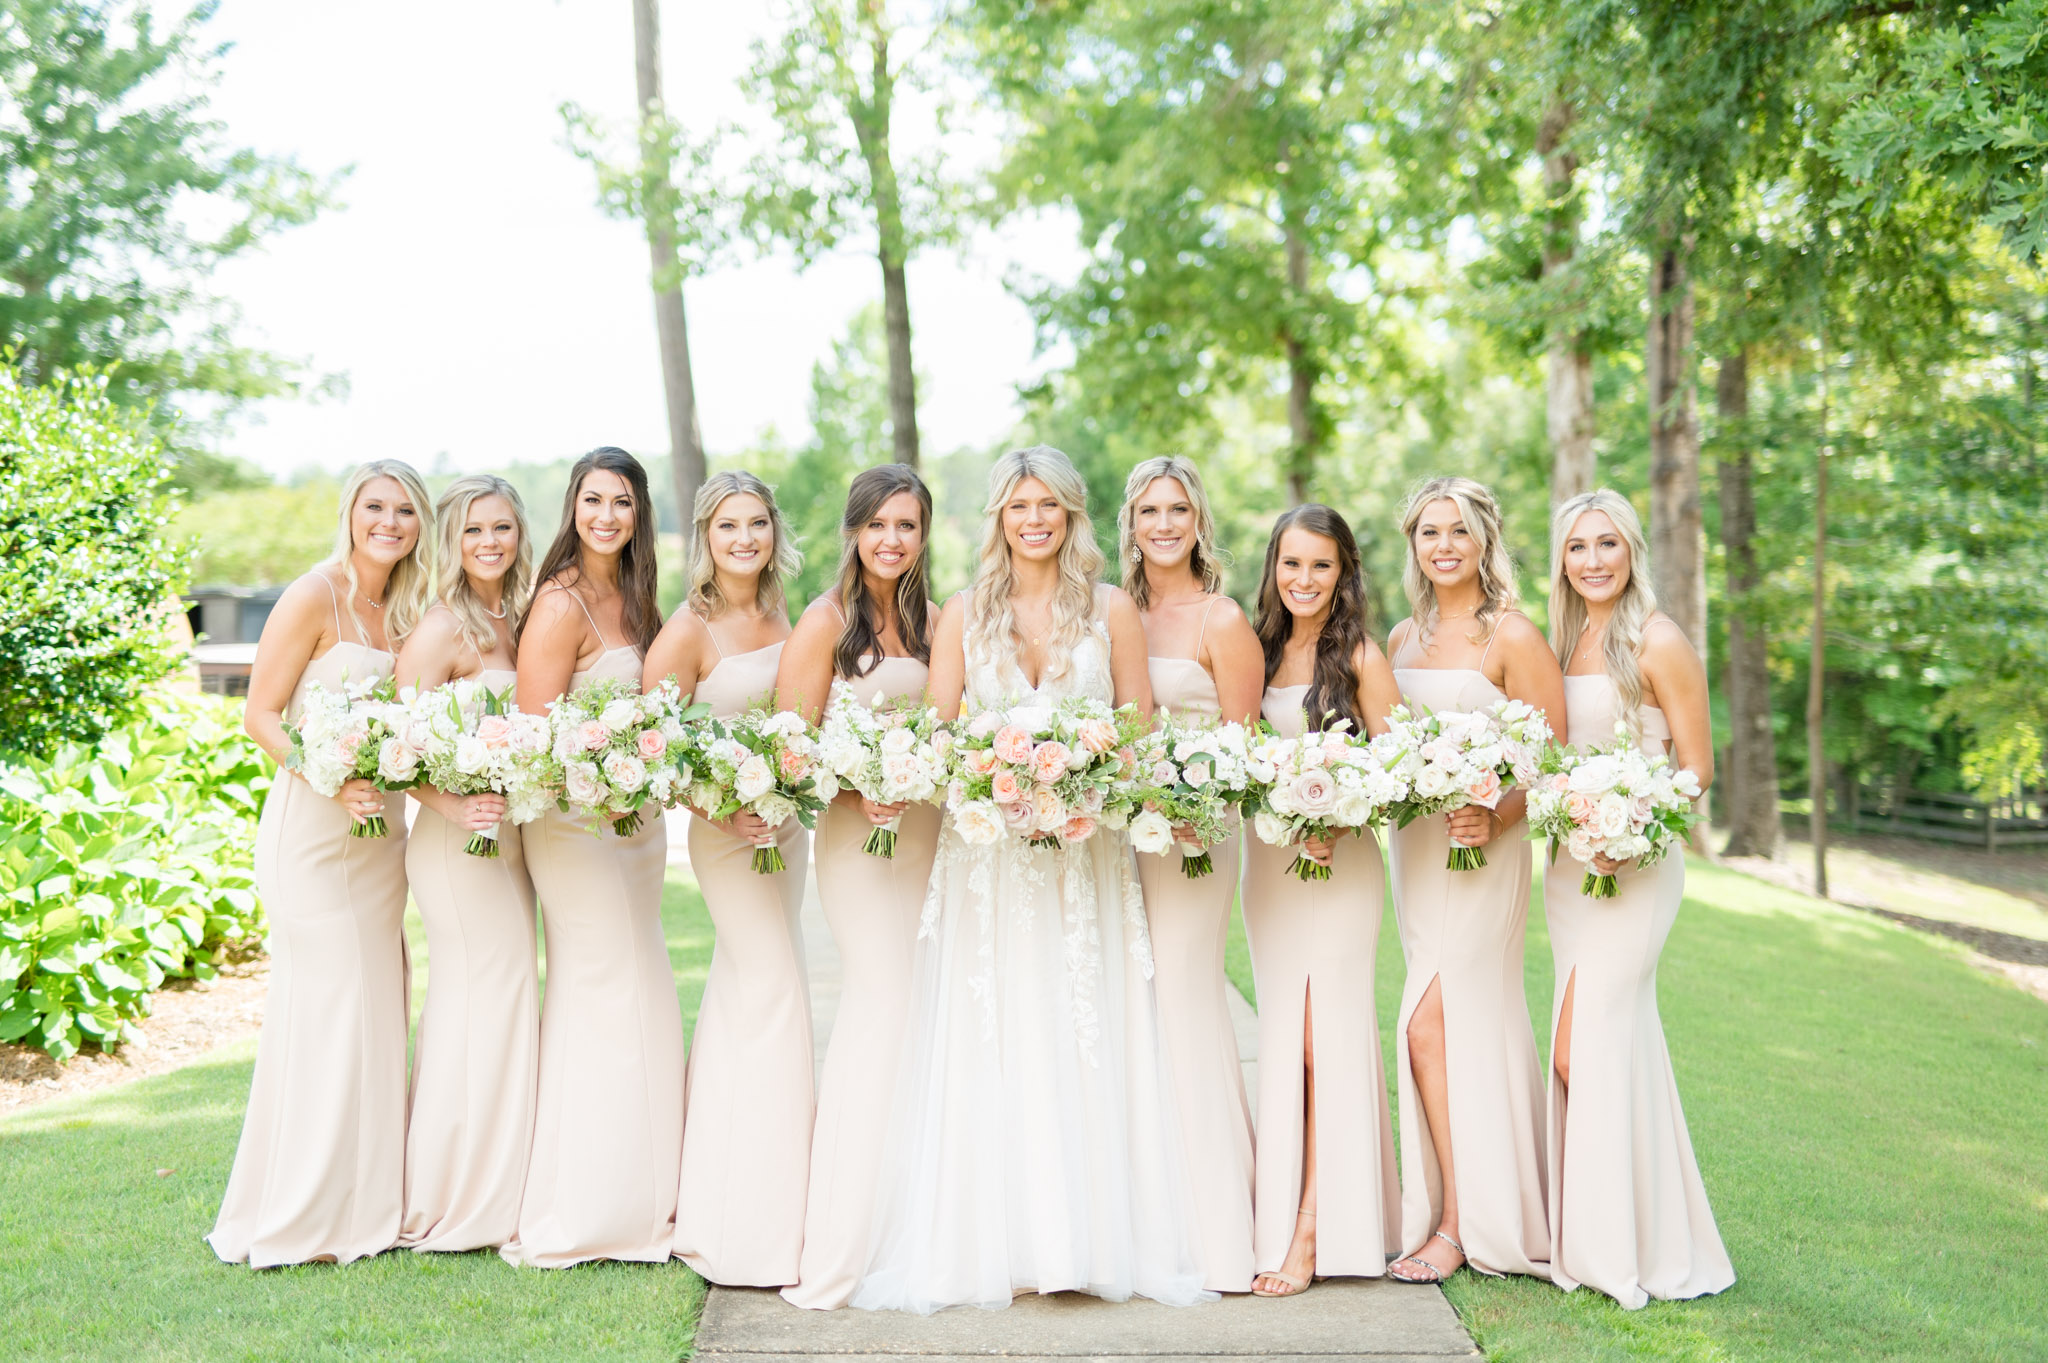 Bride and bridesmaids smile at camera together.